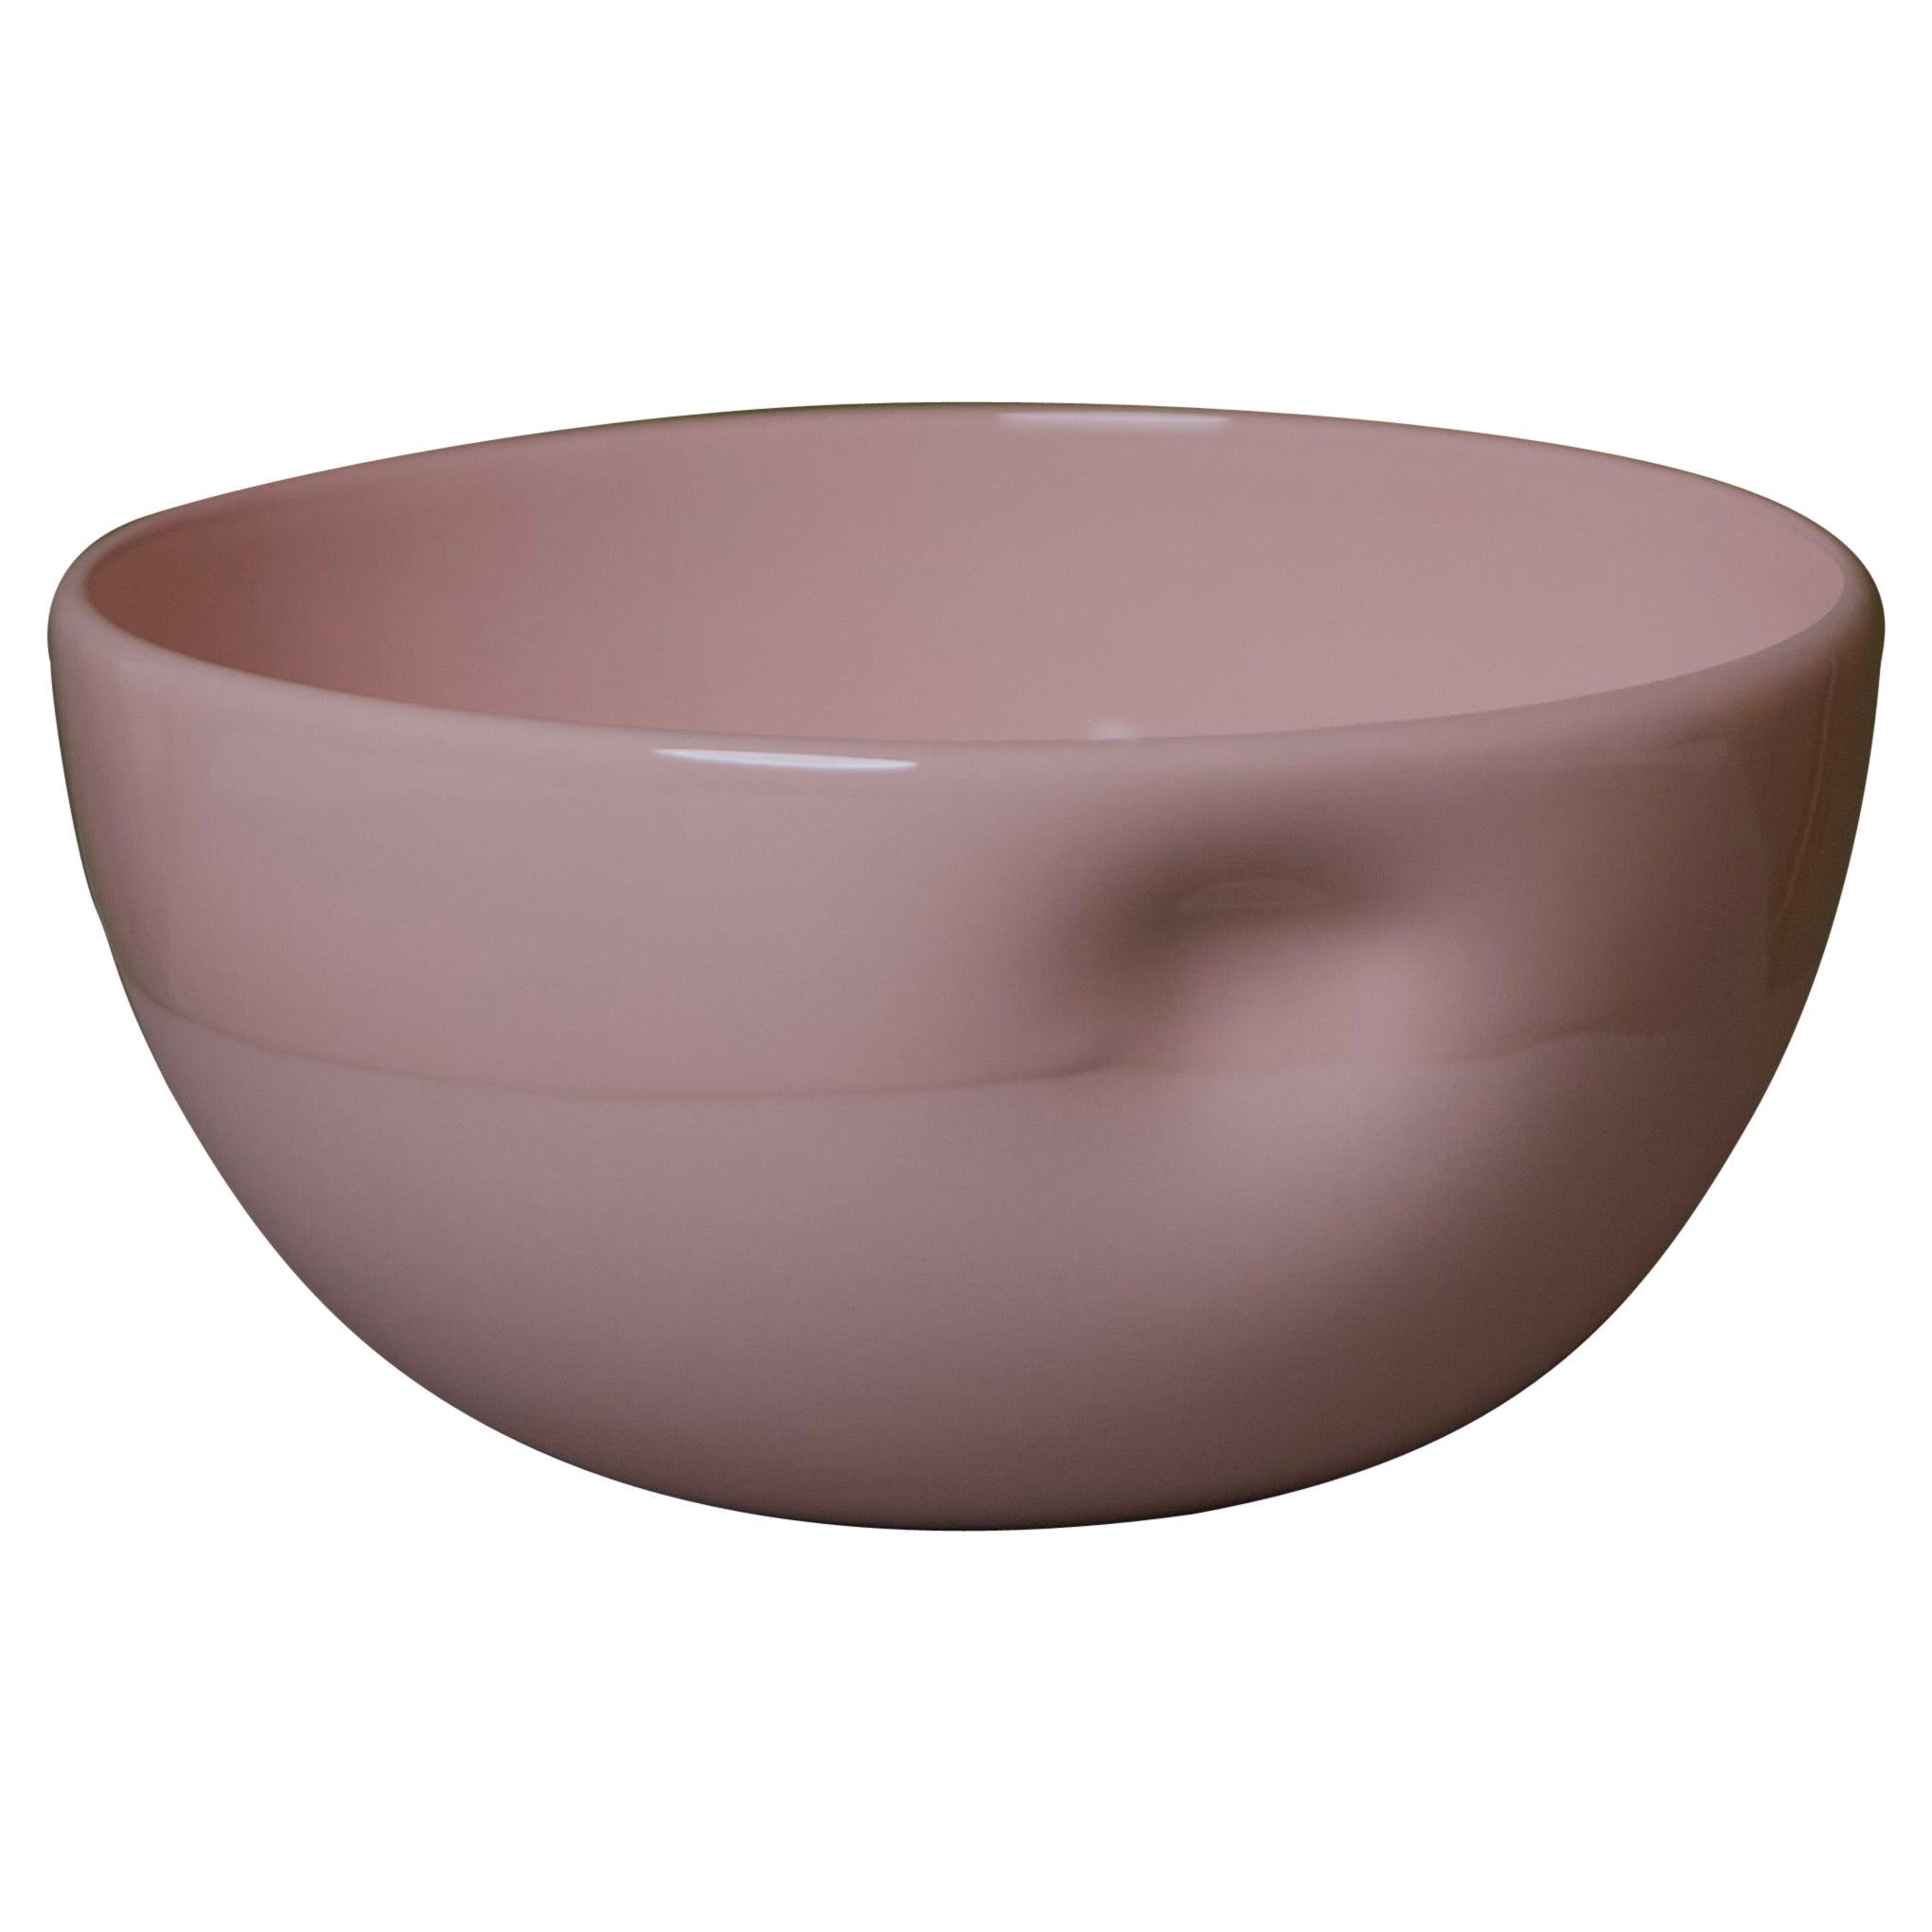 Large Dimpled Porcelain Bowl in Dusty Pink